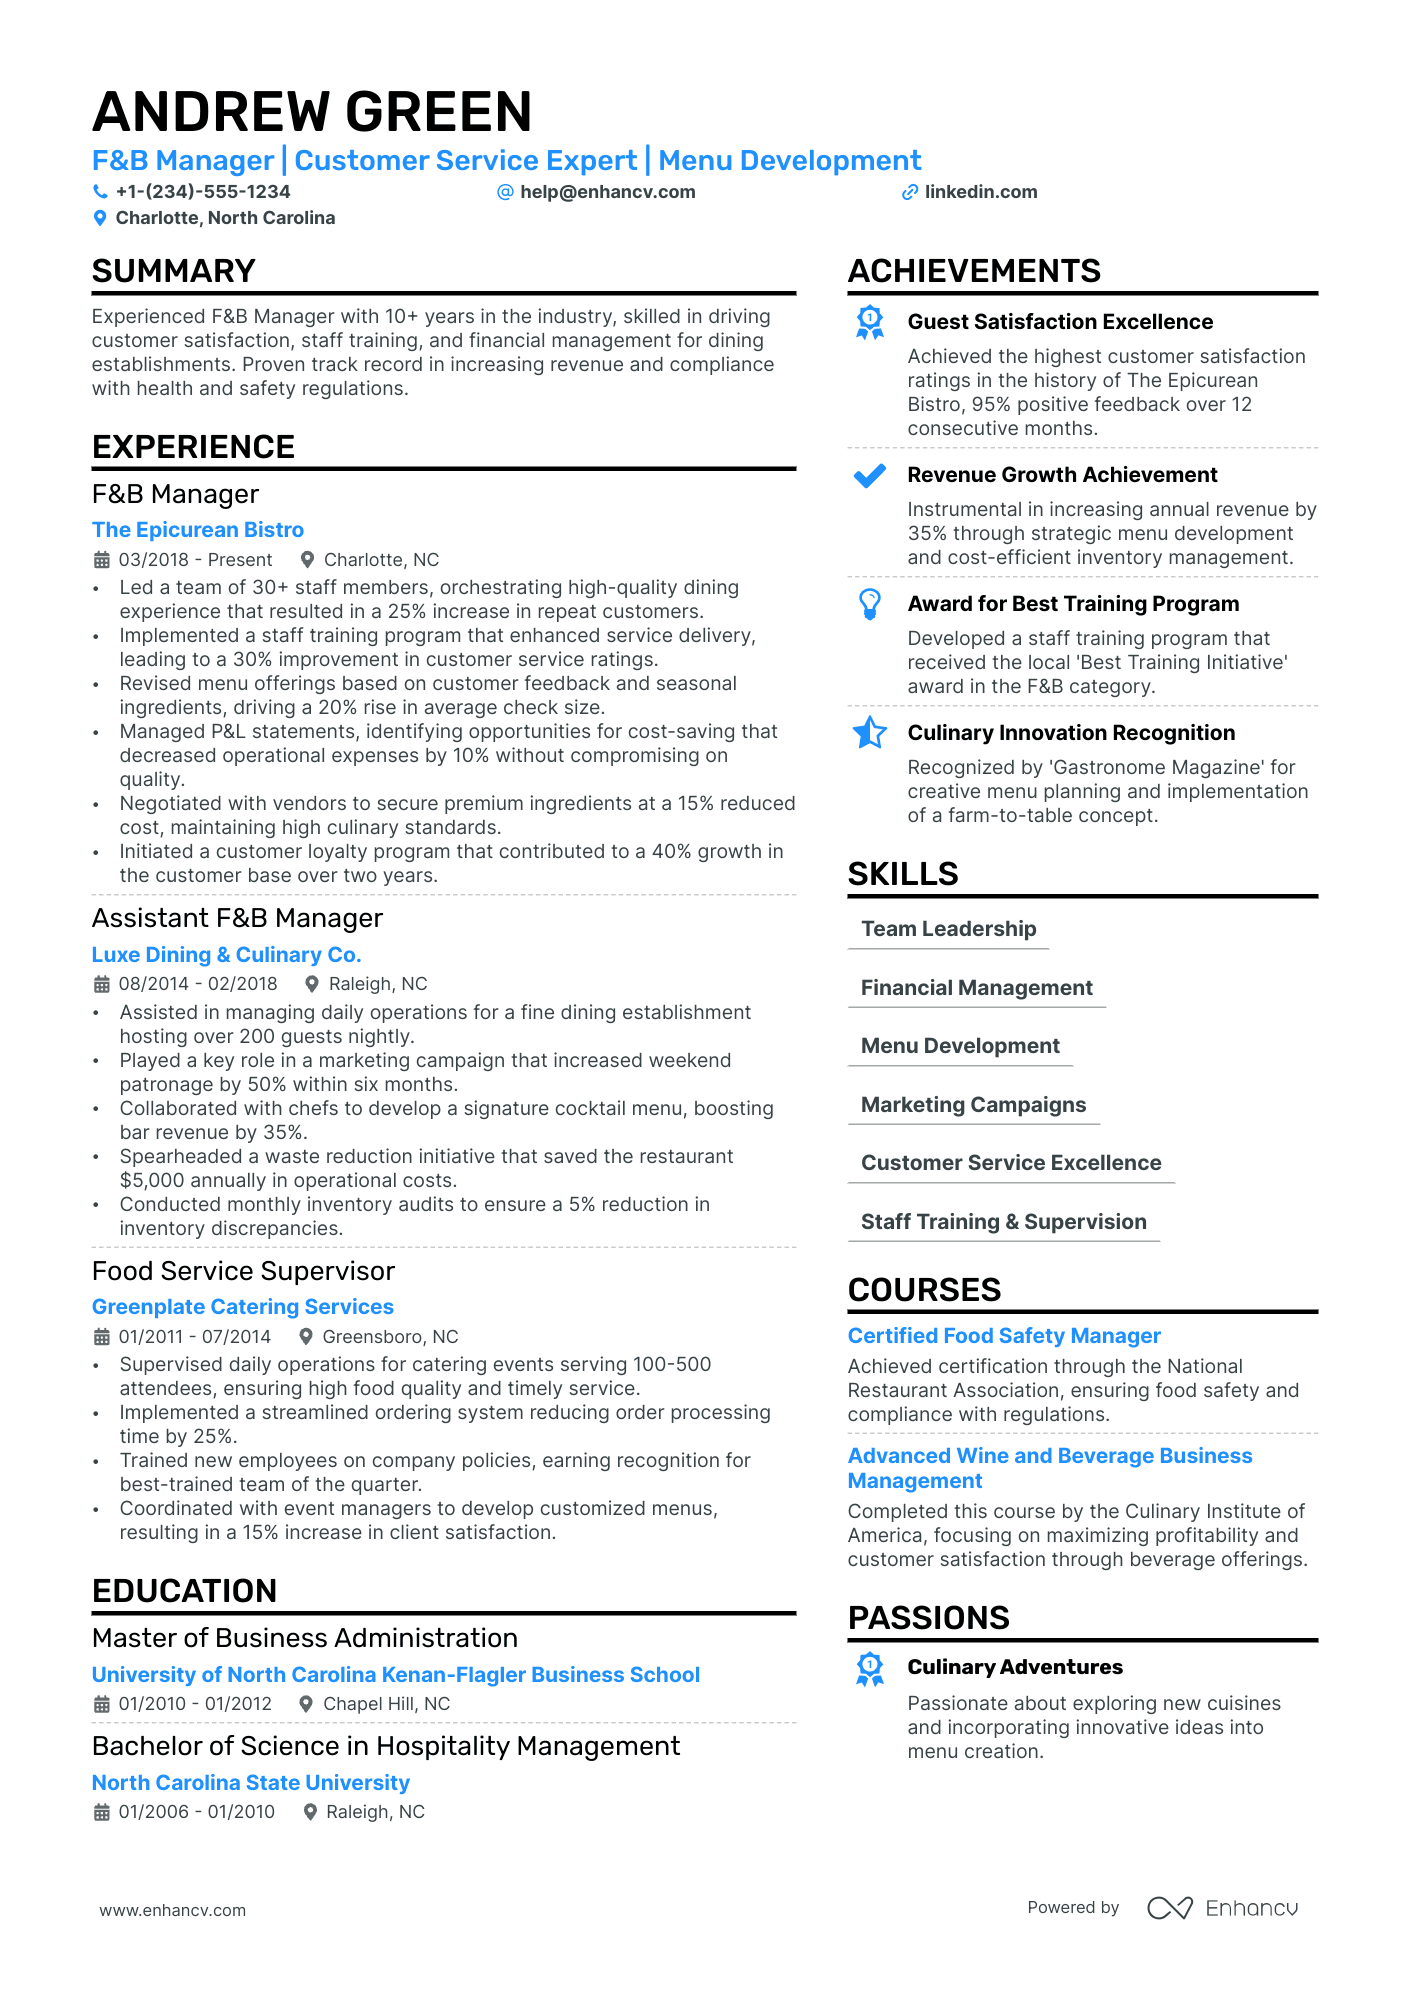 Reservations Manager resume example